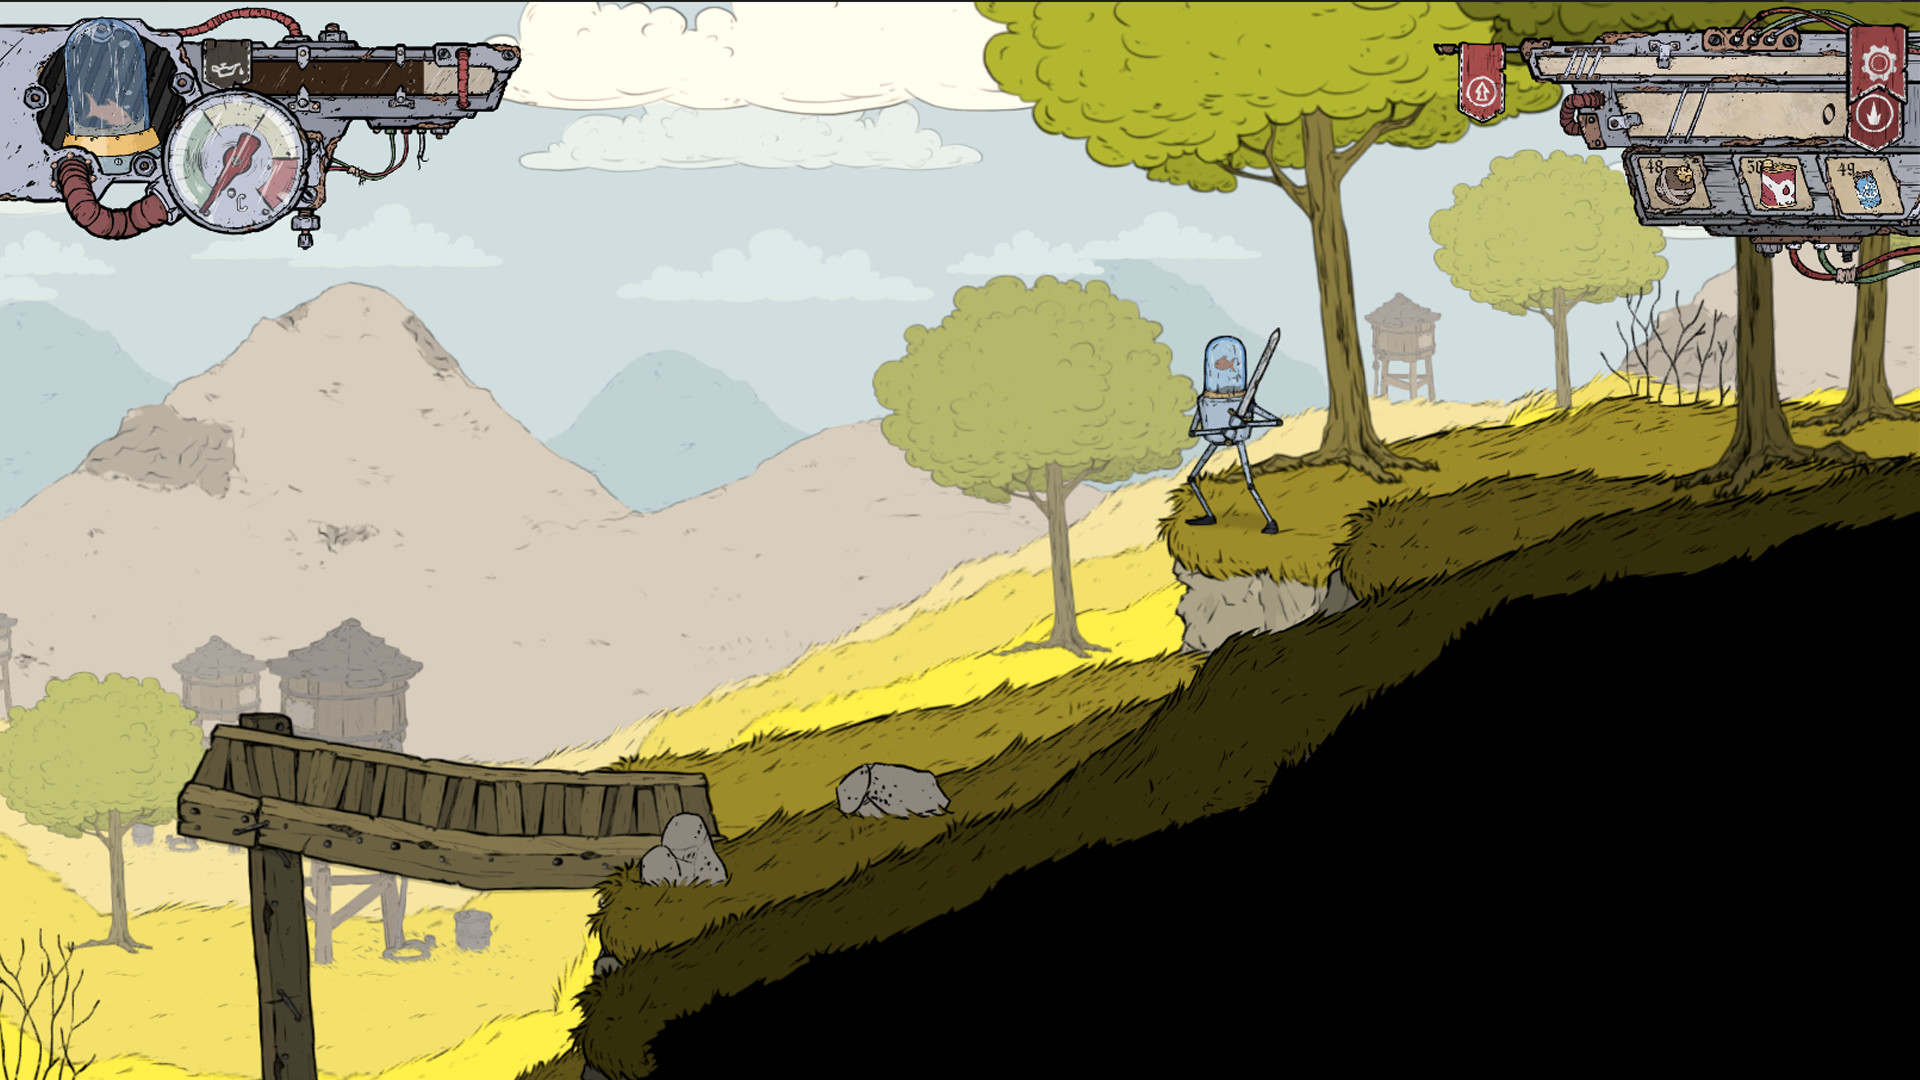 Feudal Alloy Free Download